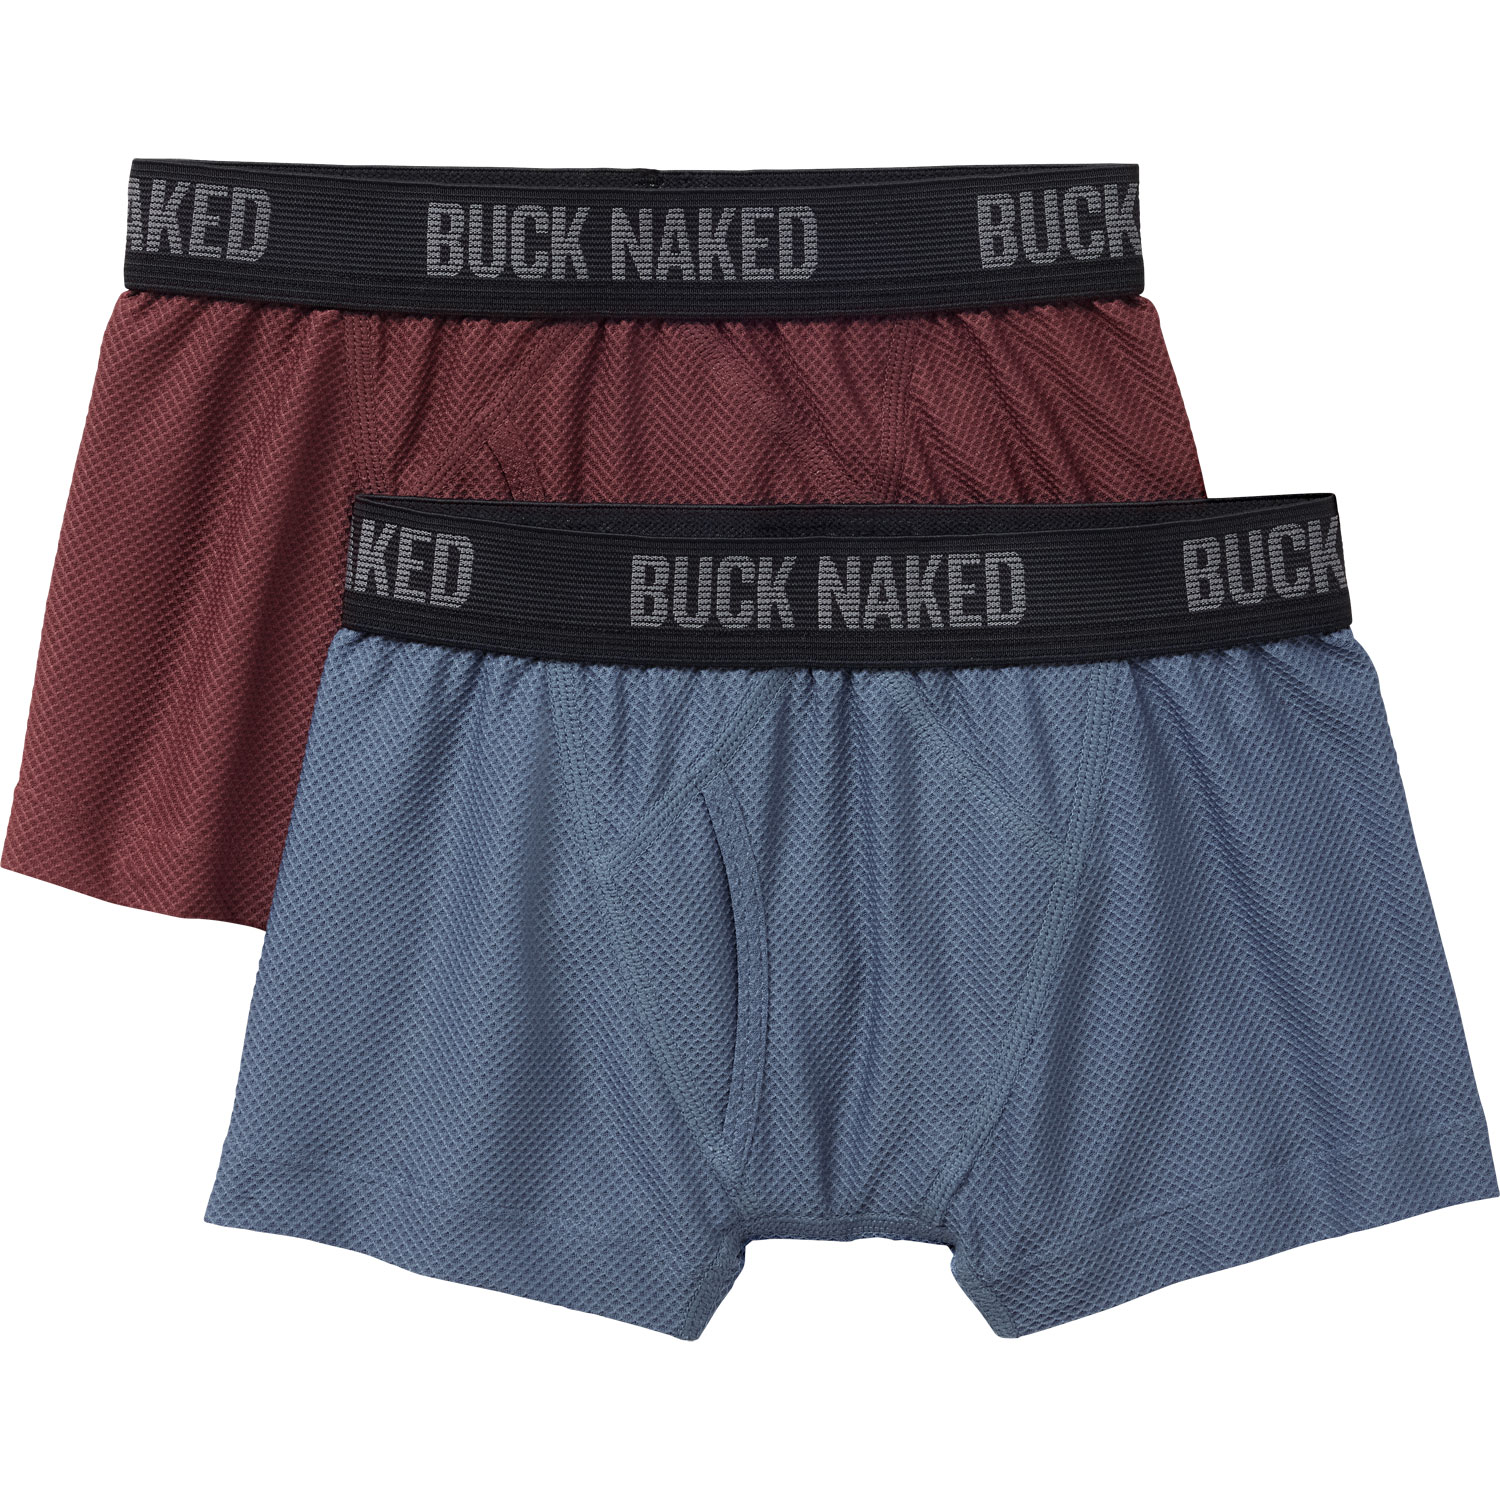 Buy a Duluth Trading Company Mens Go Buck Naked Underwear Boxer